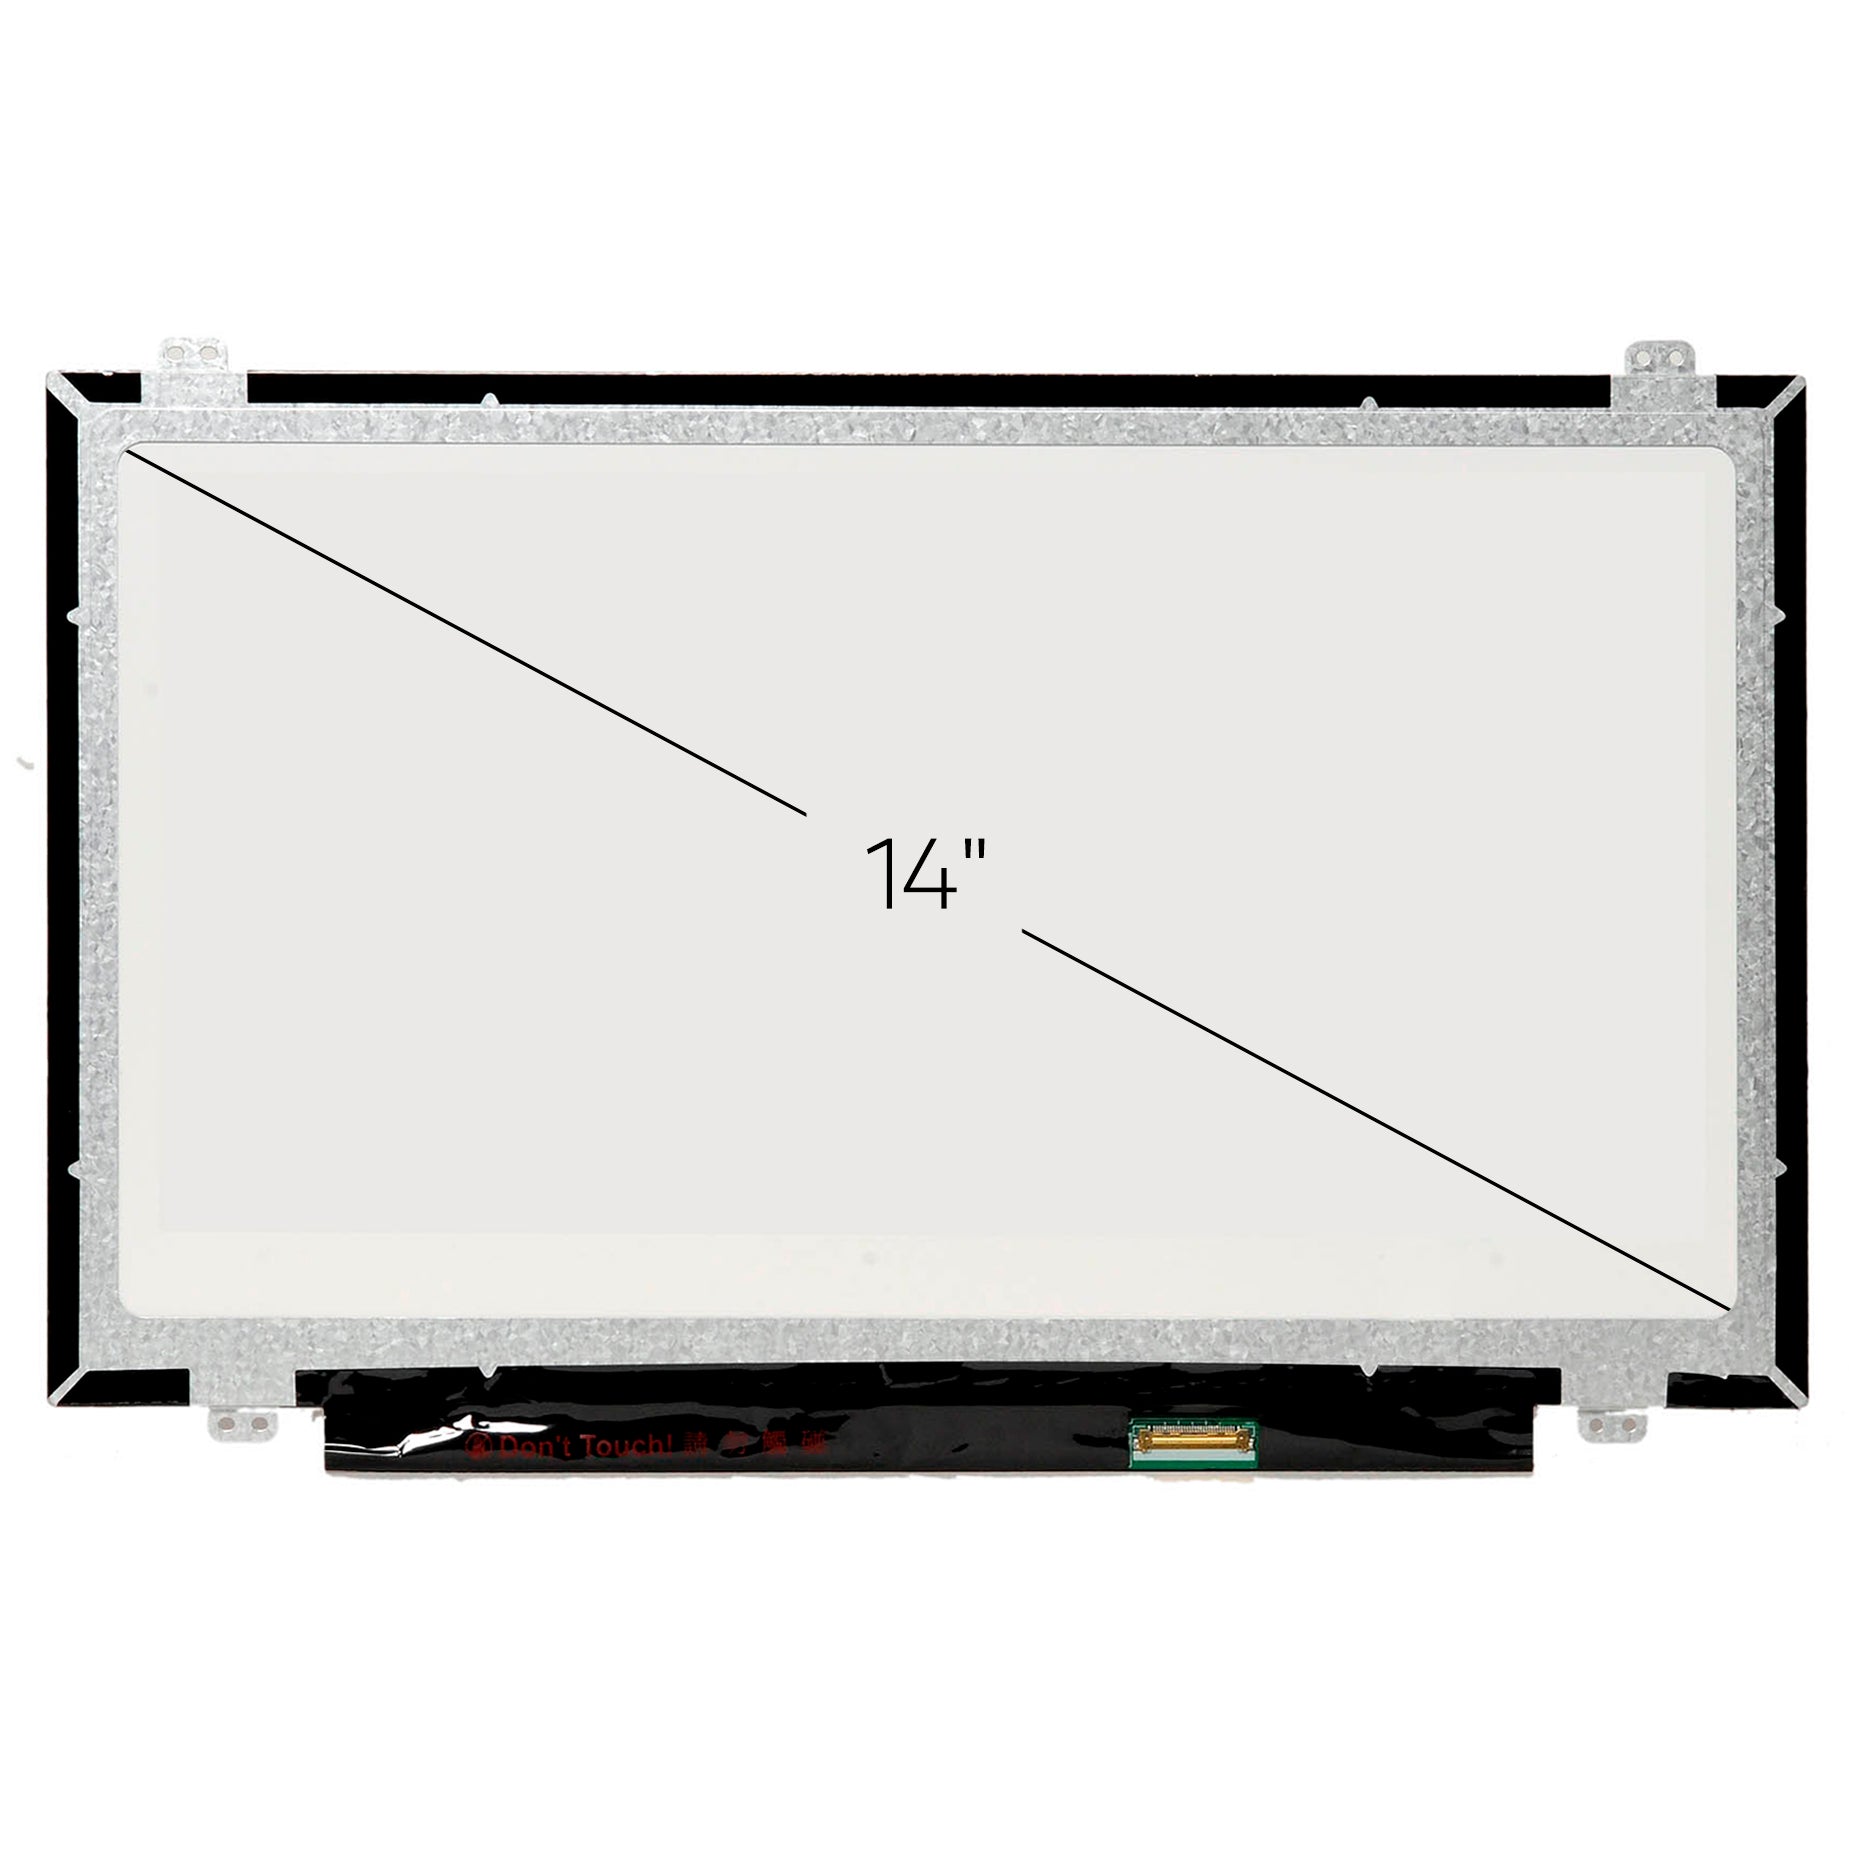 Screen Replacement for N140BGE-E33 REV.C3 HD 1366x768 Glossy LCD LED Display